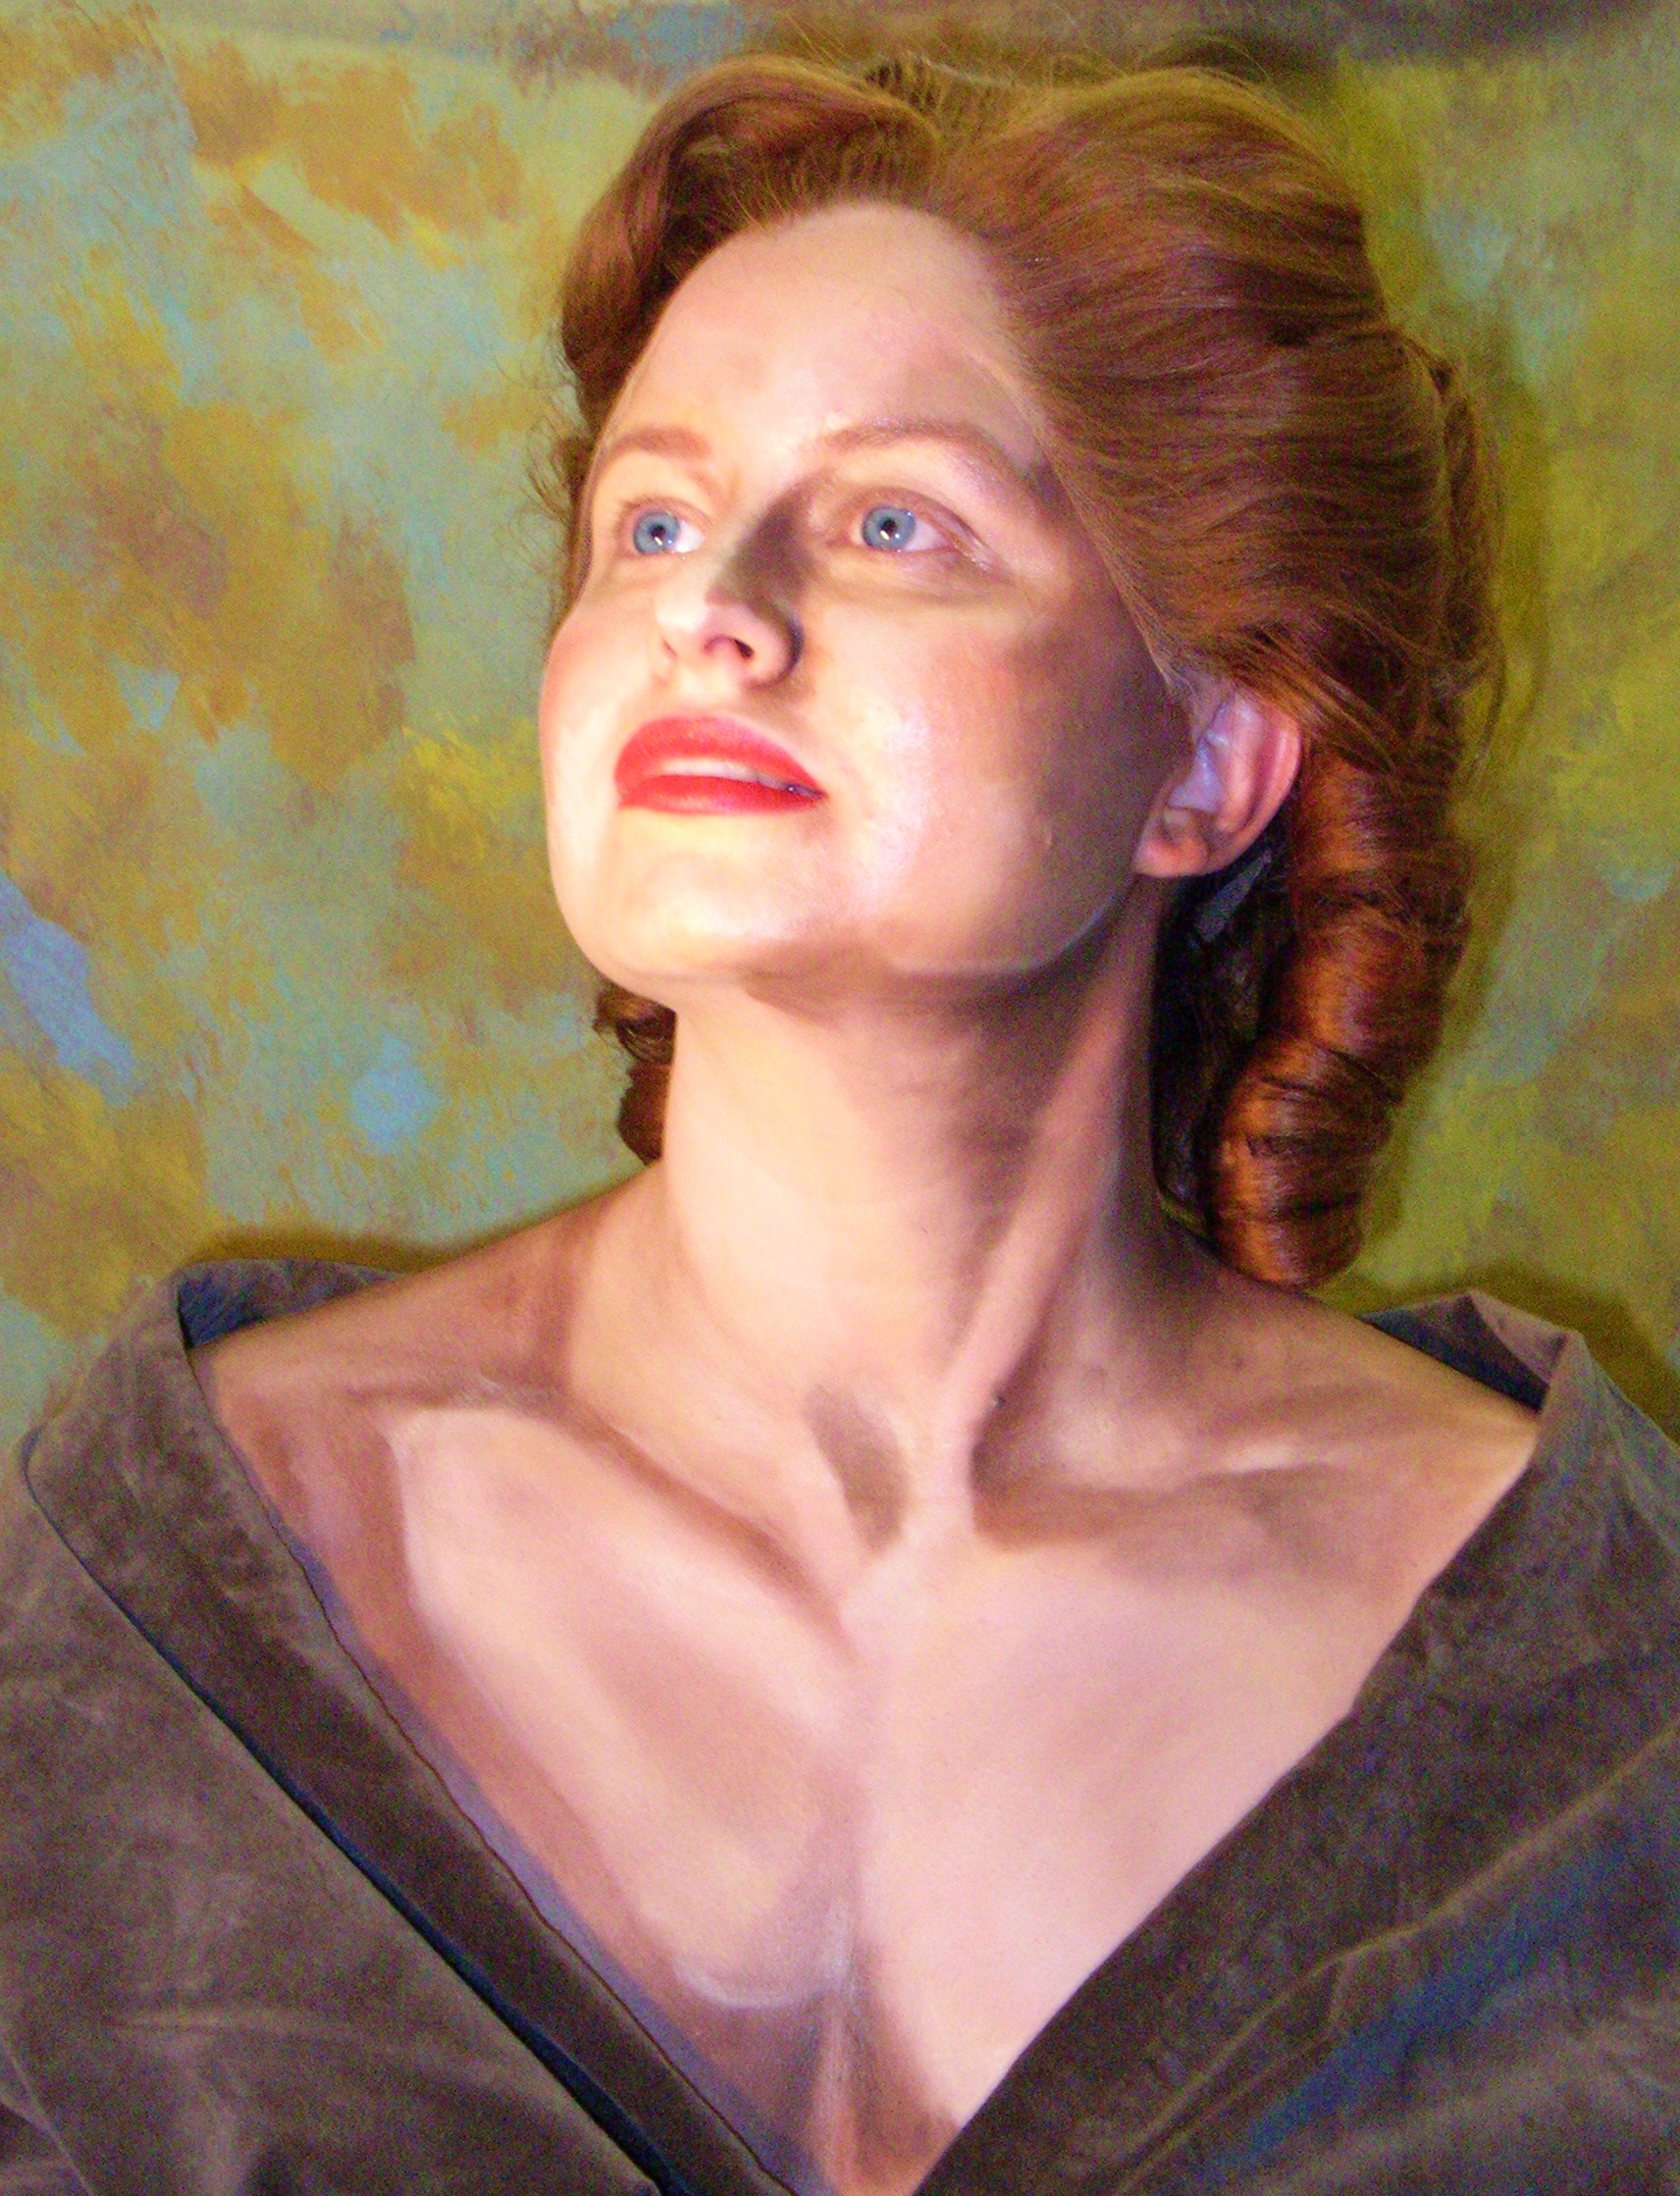 I had to re-create a portrait of Kathleen Ferrier by Maurice Codner, onto a model and photograph it.